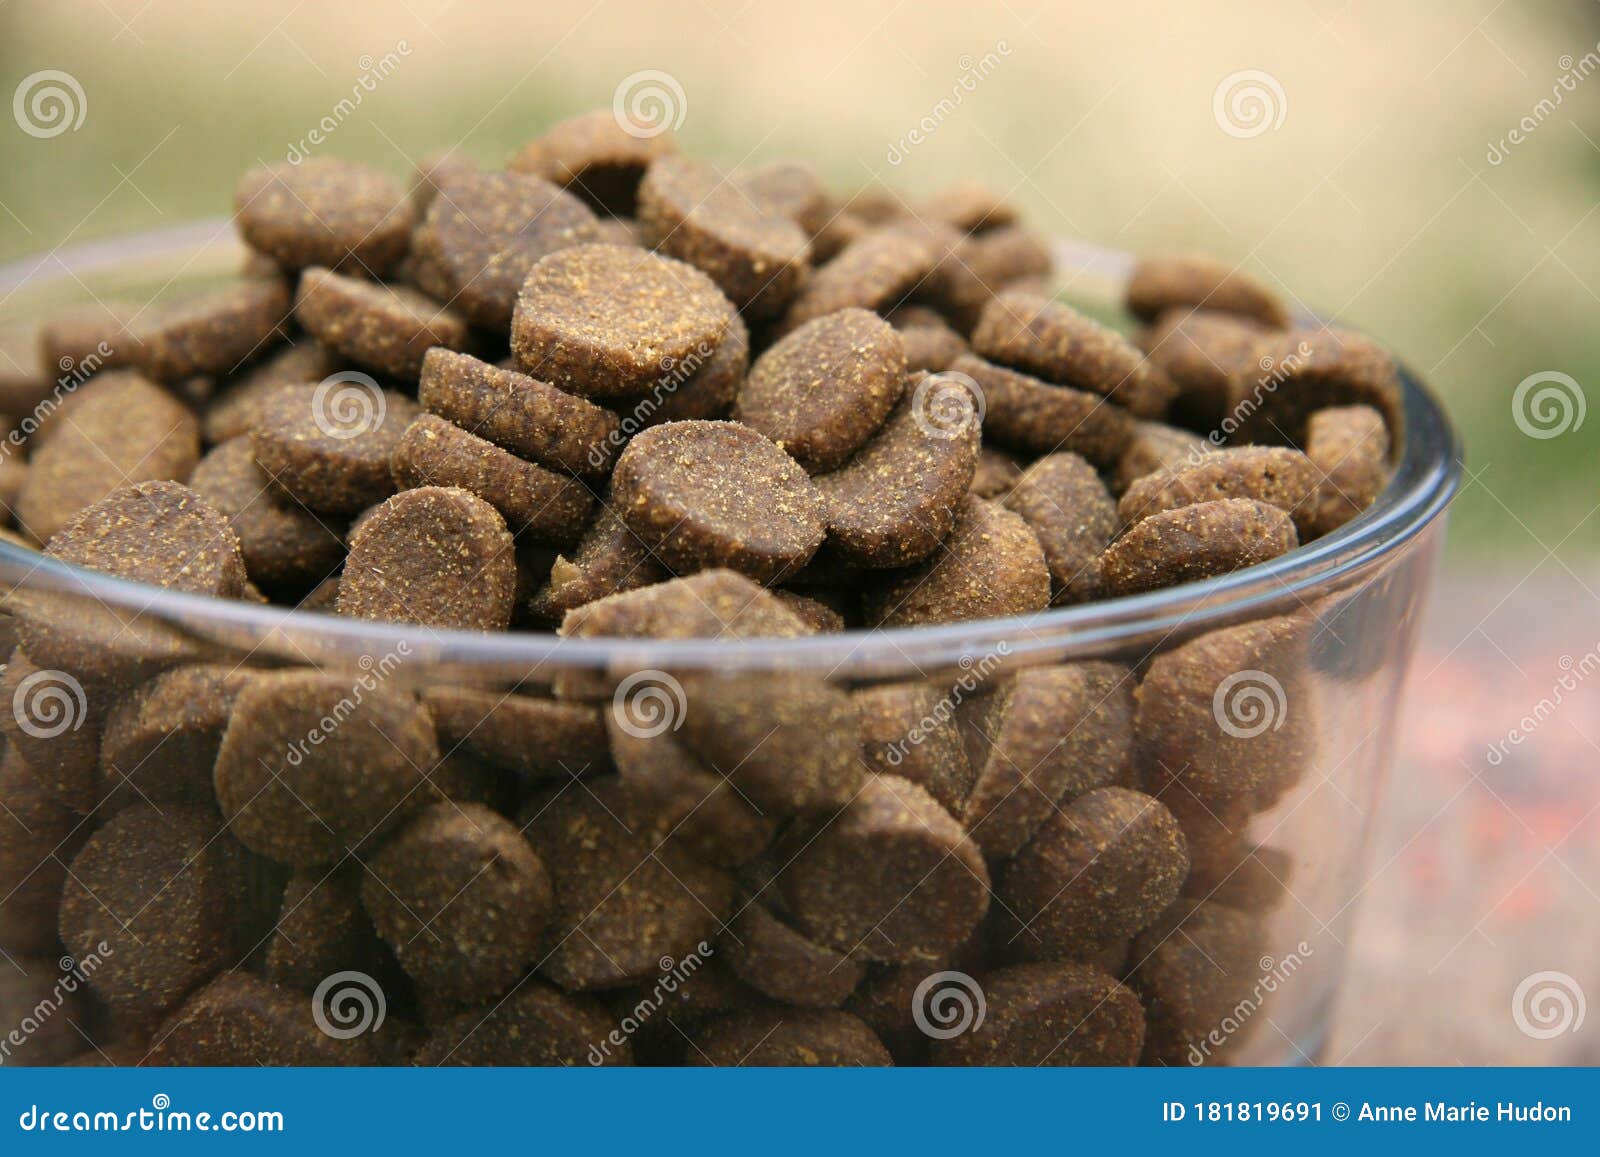 Natural Dog Food in a Bowl Kibble Pet Nutrition Food Stock Image - Image of  outdoor, organic: 181819691